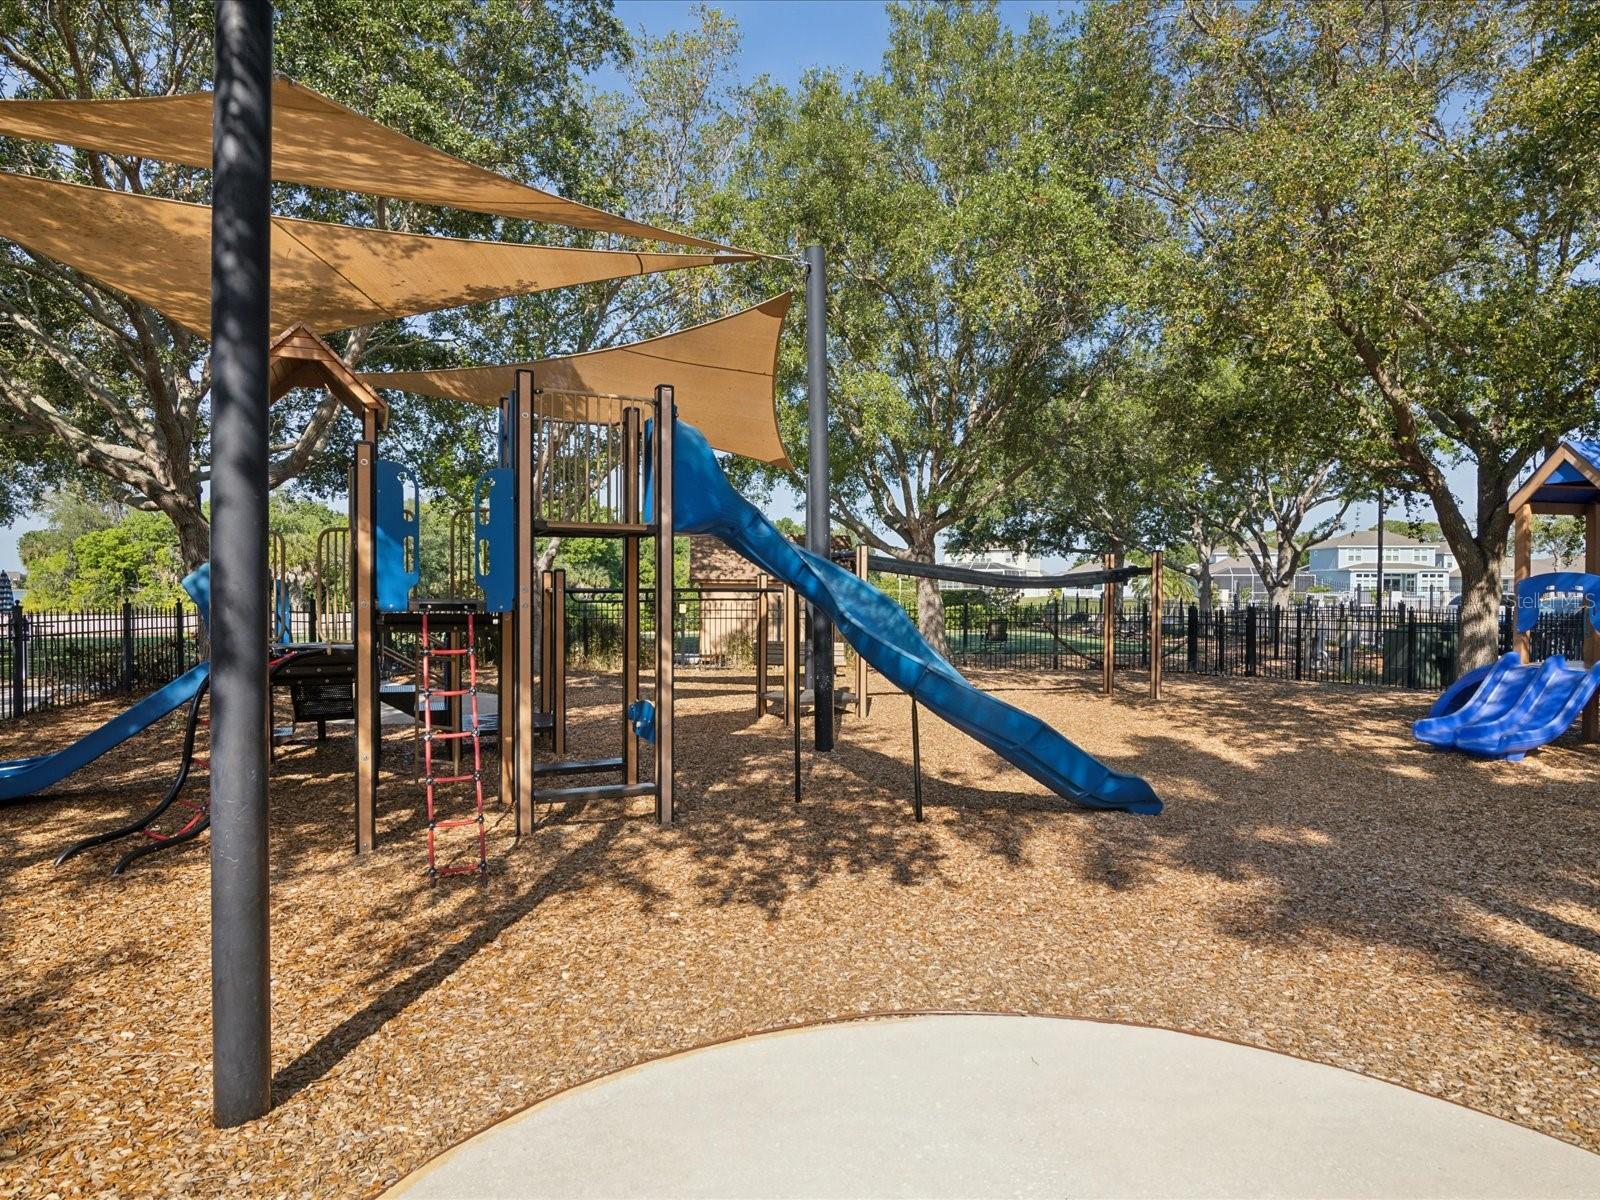 Take the kids to play inside a fenced and secure playground.